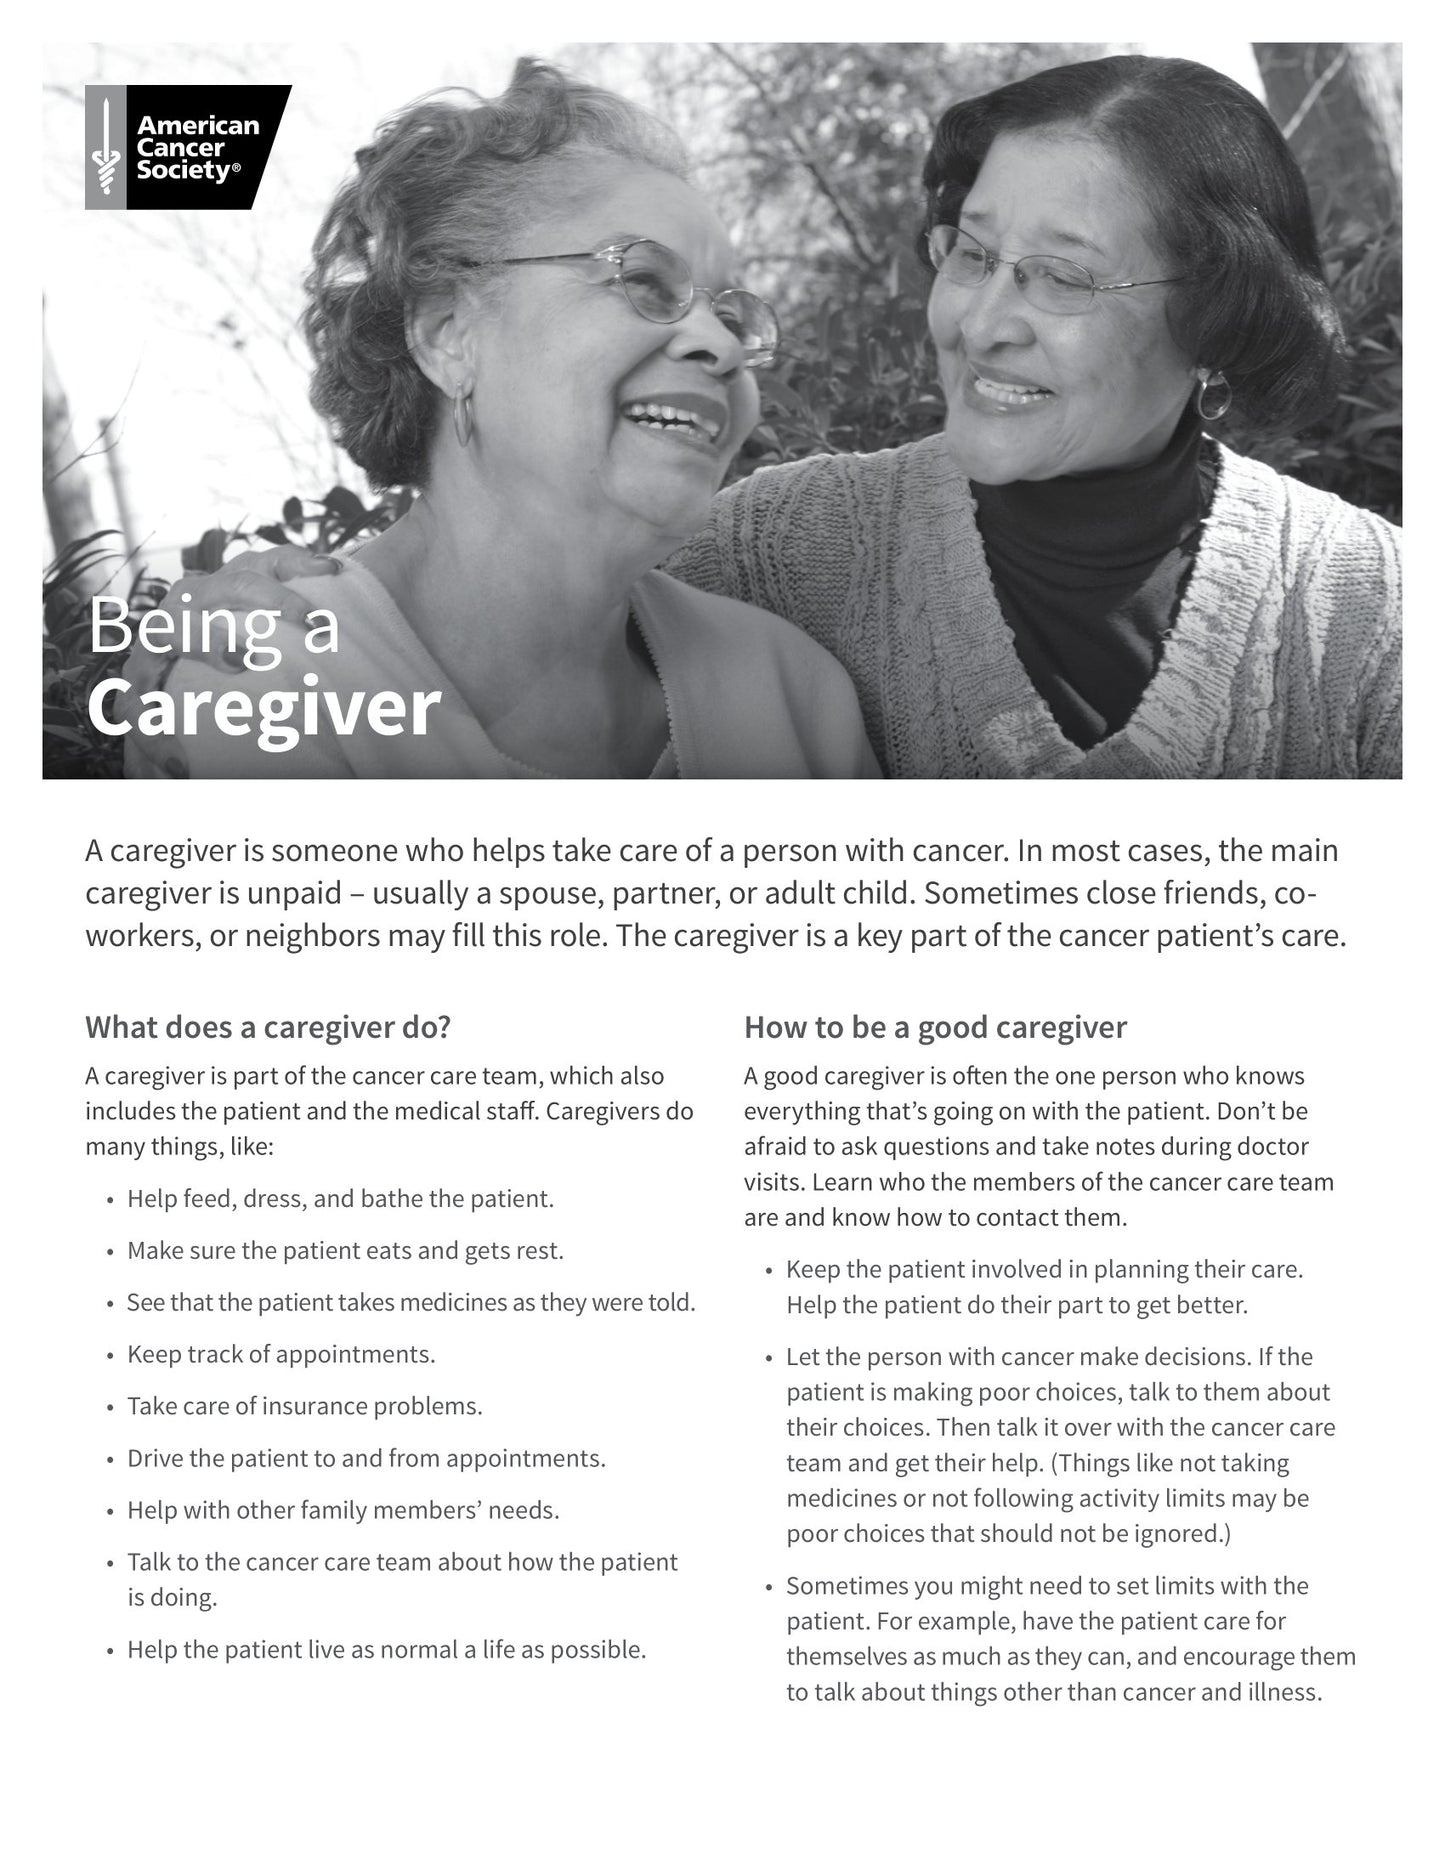 Being A Caregiver Tearsheet x 50 - English (2134.00)